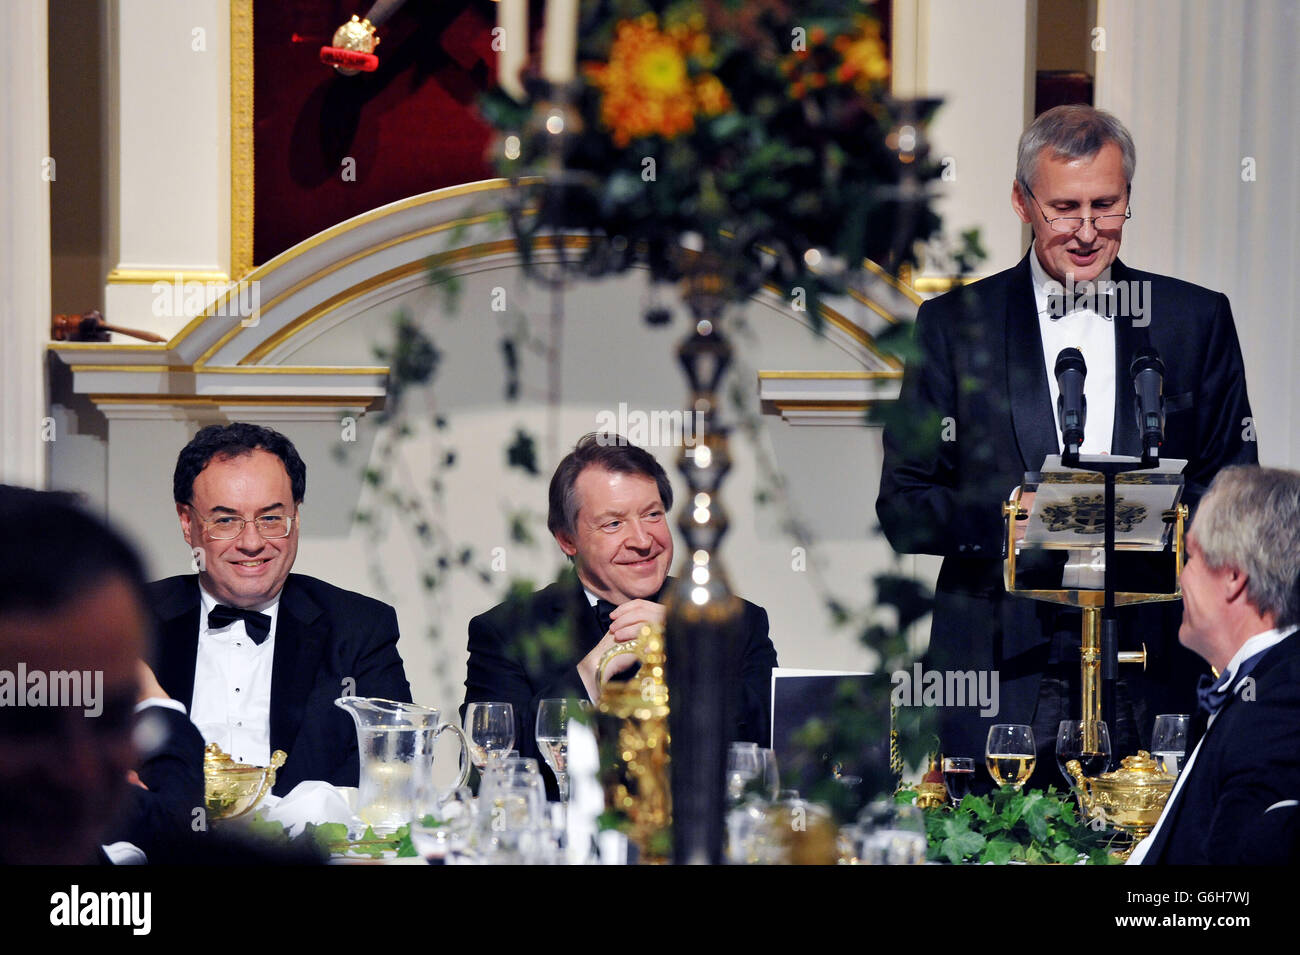 Financial Conduct Authority chief executive Martin Wheatley (right) delivers his speech as the Lord Mayor Roger Gifford (centre) and Prudential Regulation Authority chief executive Andrew Bailey (left) listen, during the City Banquet at Mansion House in the City of London. Stock Photo